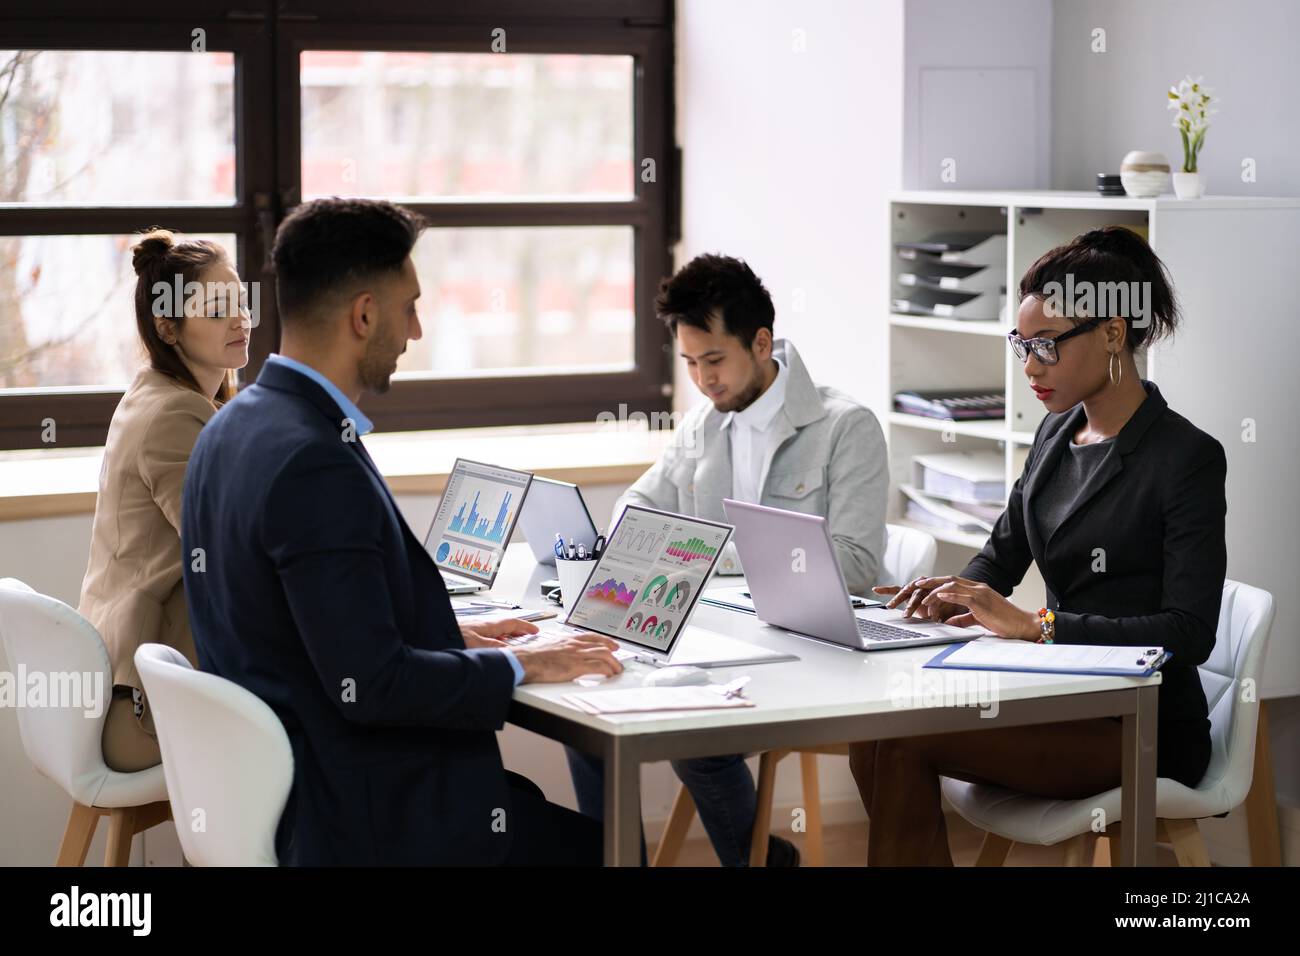 Diverse Business People Discussions In Office. Group Meeting Stock Photo